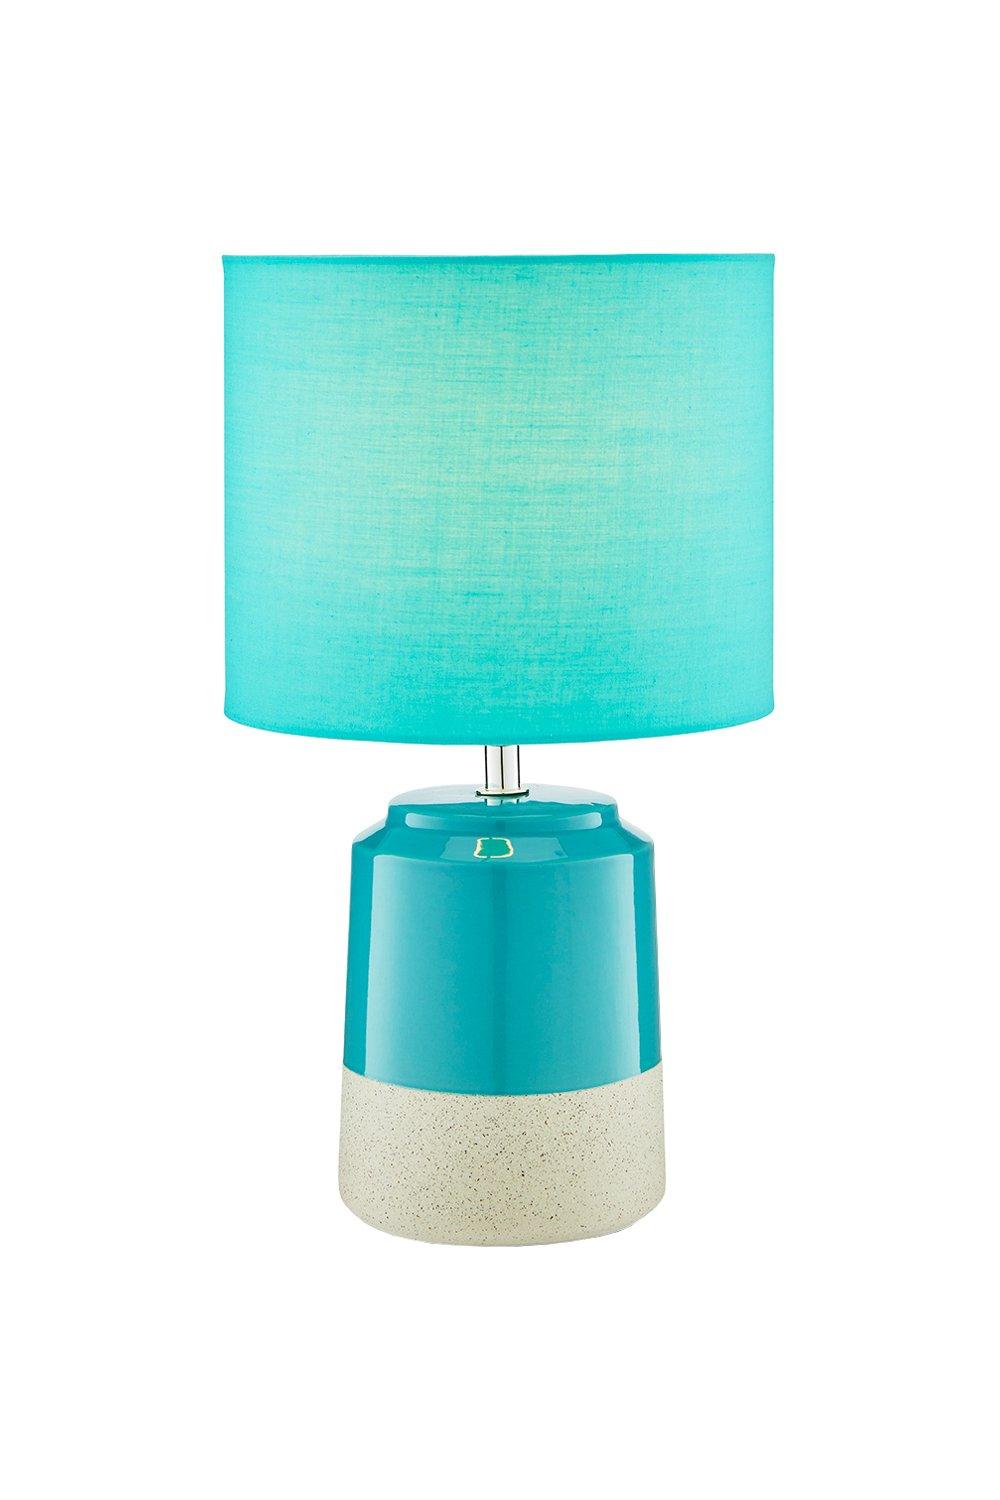 'Pop' Table Lamp Turquoise